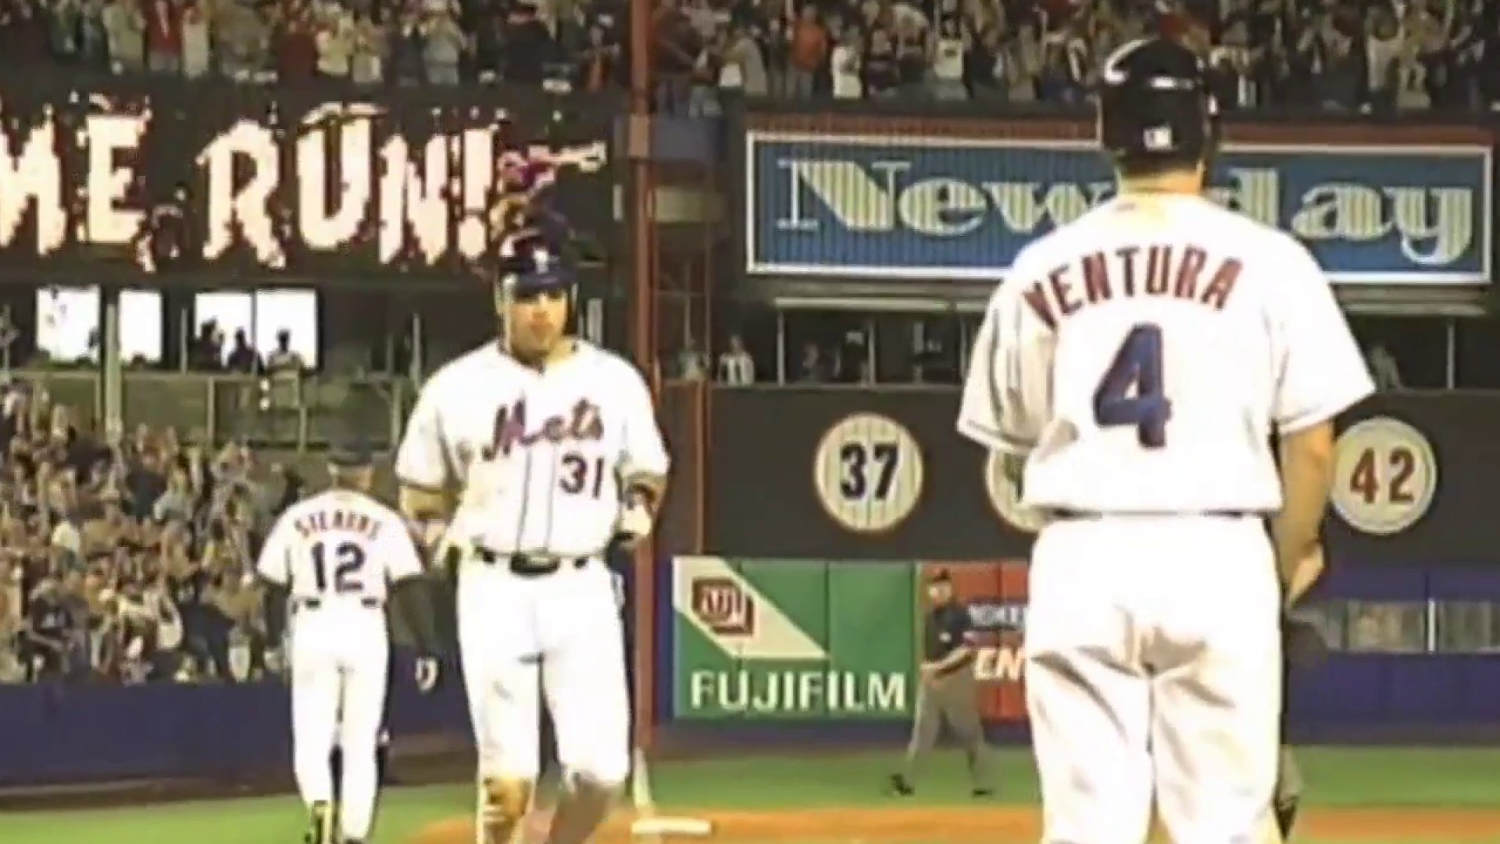 Re-live Mike Piazza's emotional home run in New York's first MLB